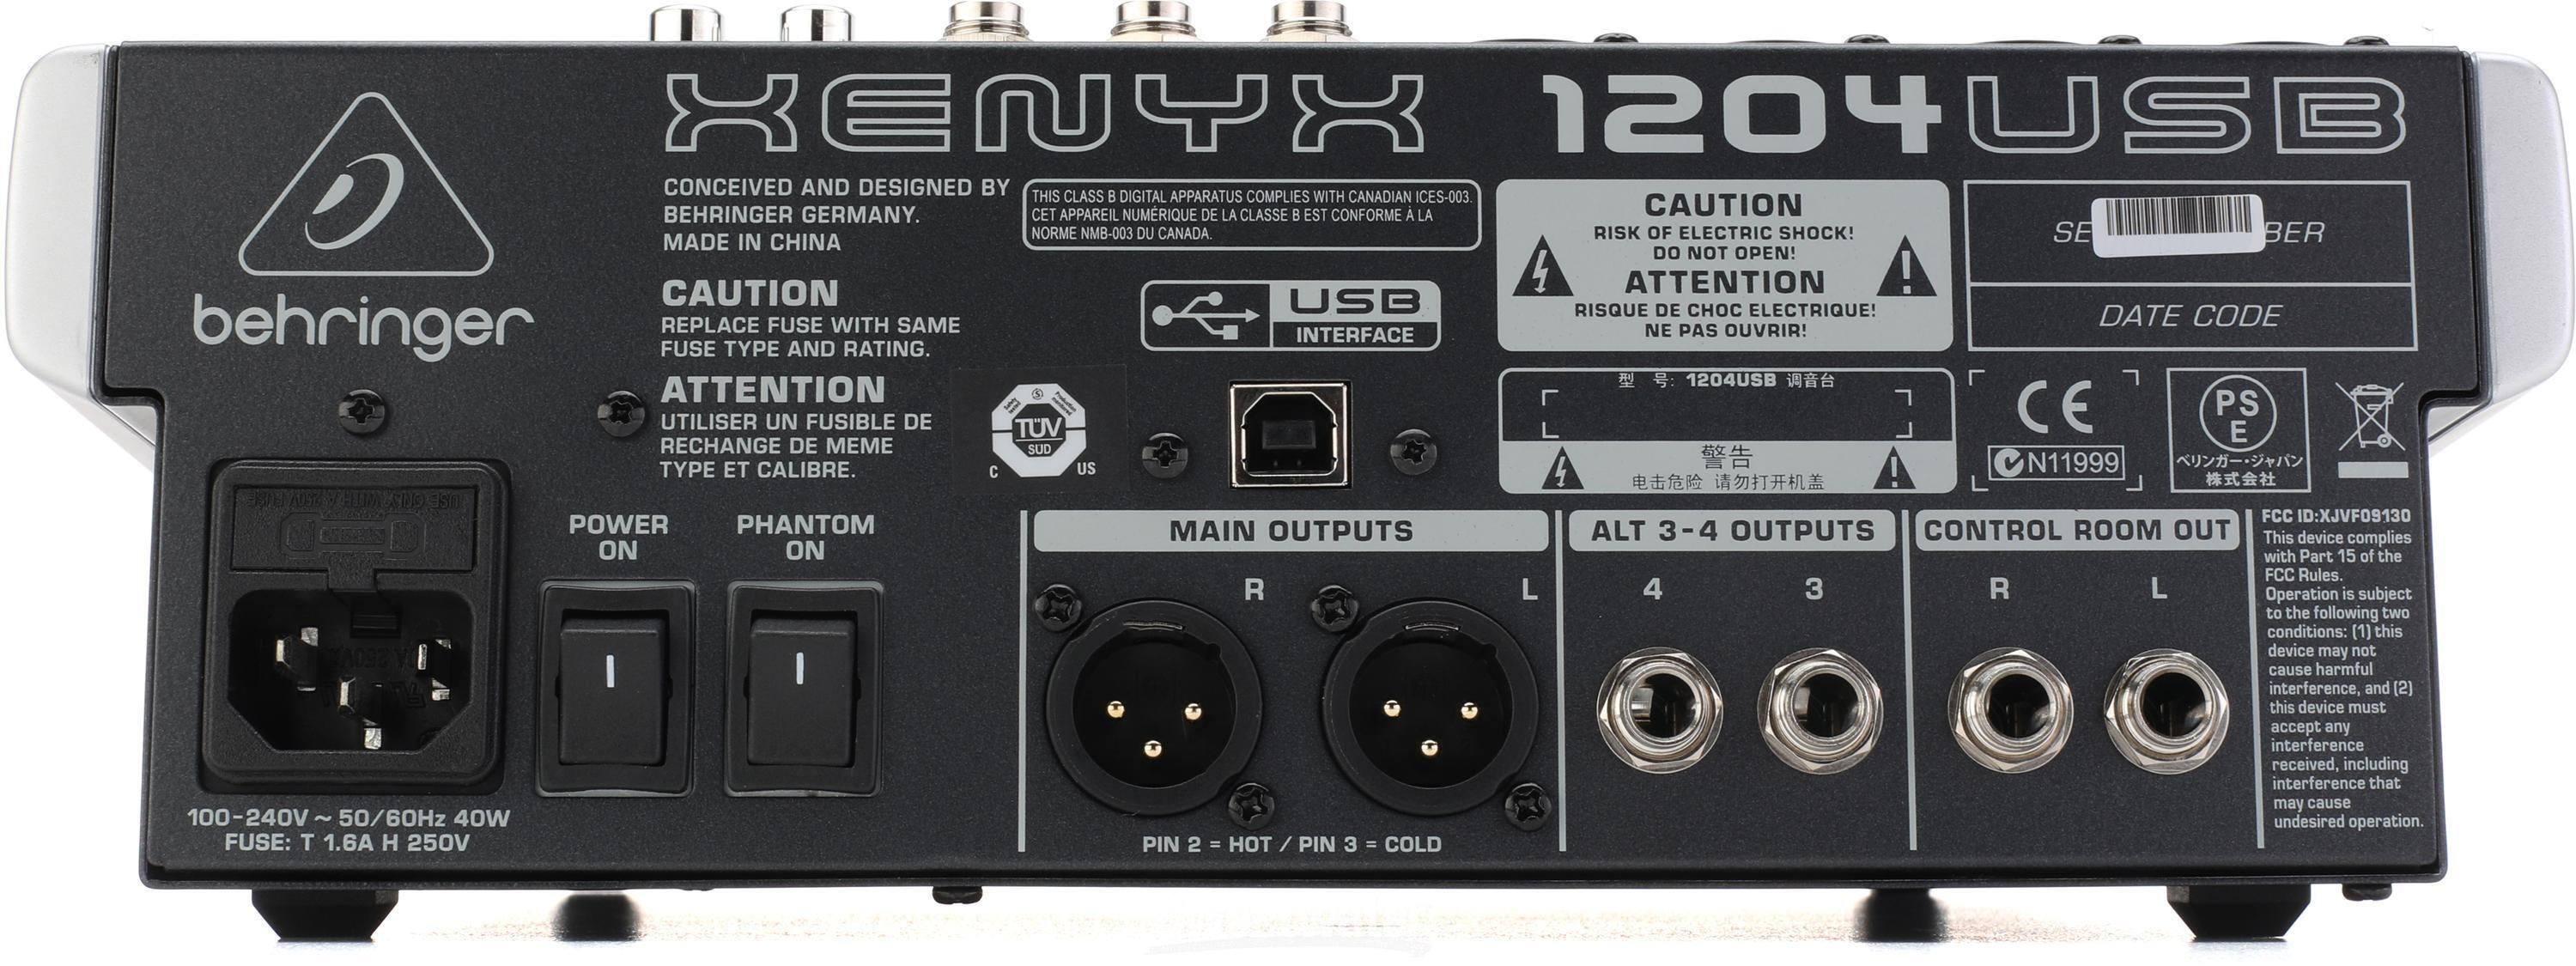 Behringer Xenyx 1204USB Mixer with USB Reviews | Sweetwater